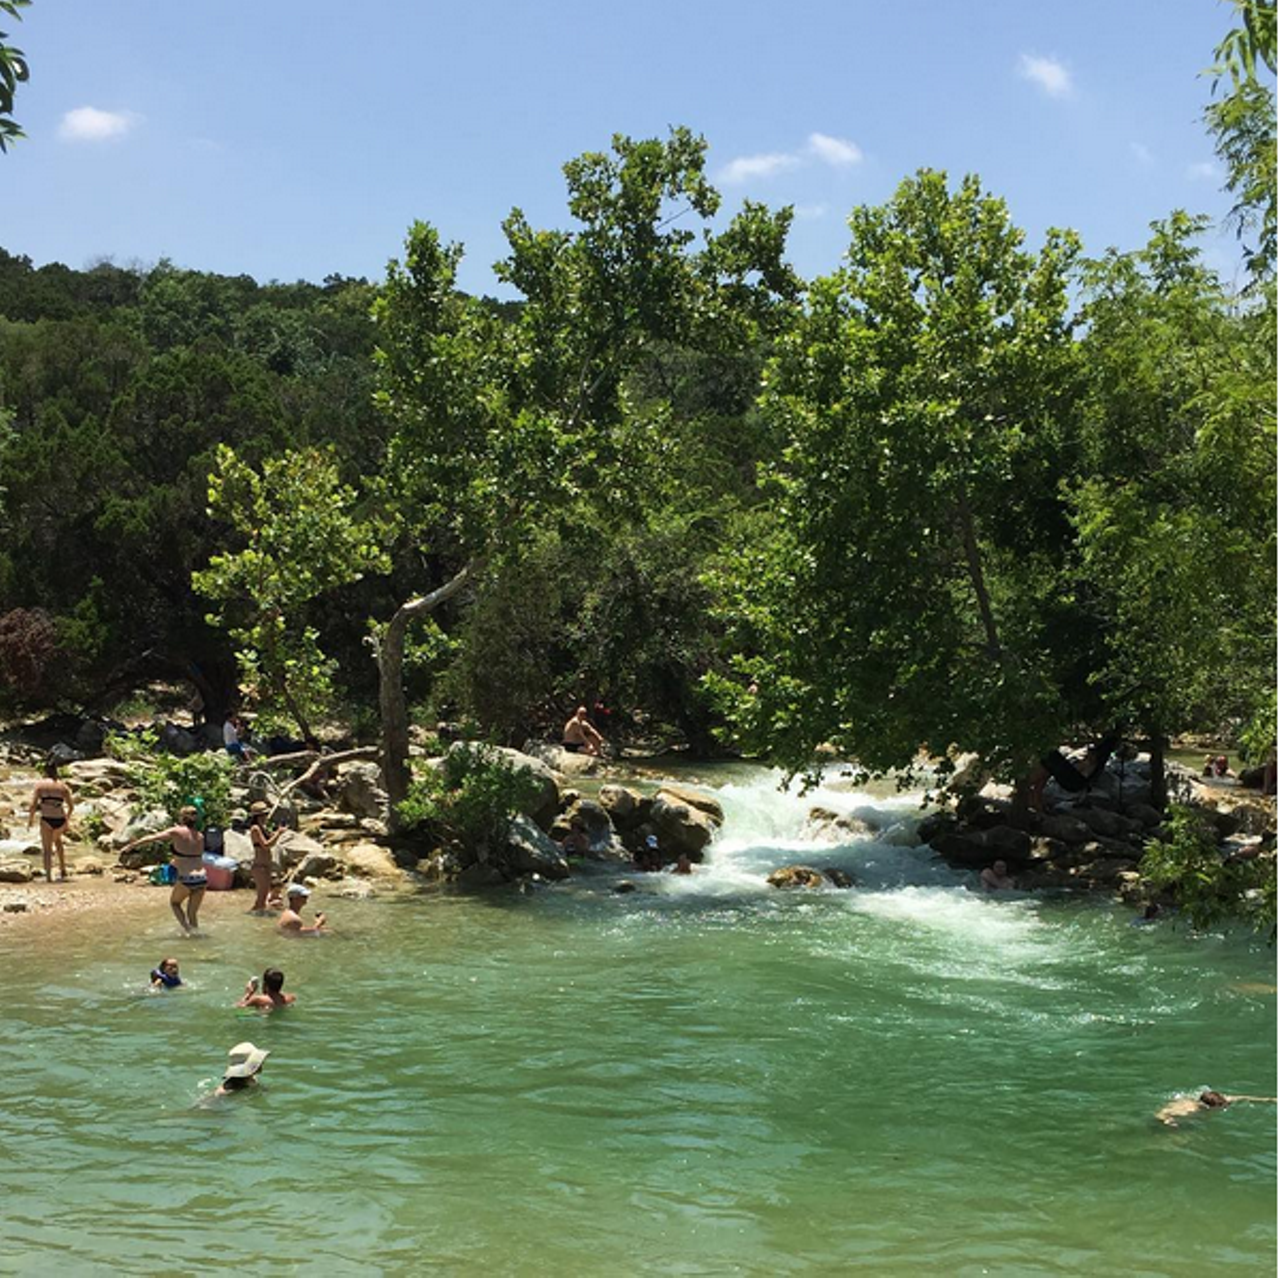 Twin Falls
3755 S. Capital of Texas Hwy., Austin, TXThis Austin swimming hole is tucked away in the beautiful Barton Creek Greenbelt. It's a great fee alternative to visiting Barton Springs Pool. 
Instagram/metival818